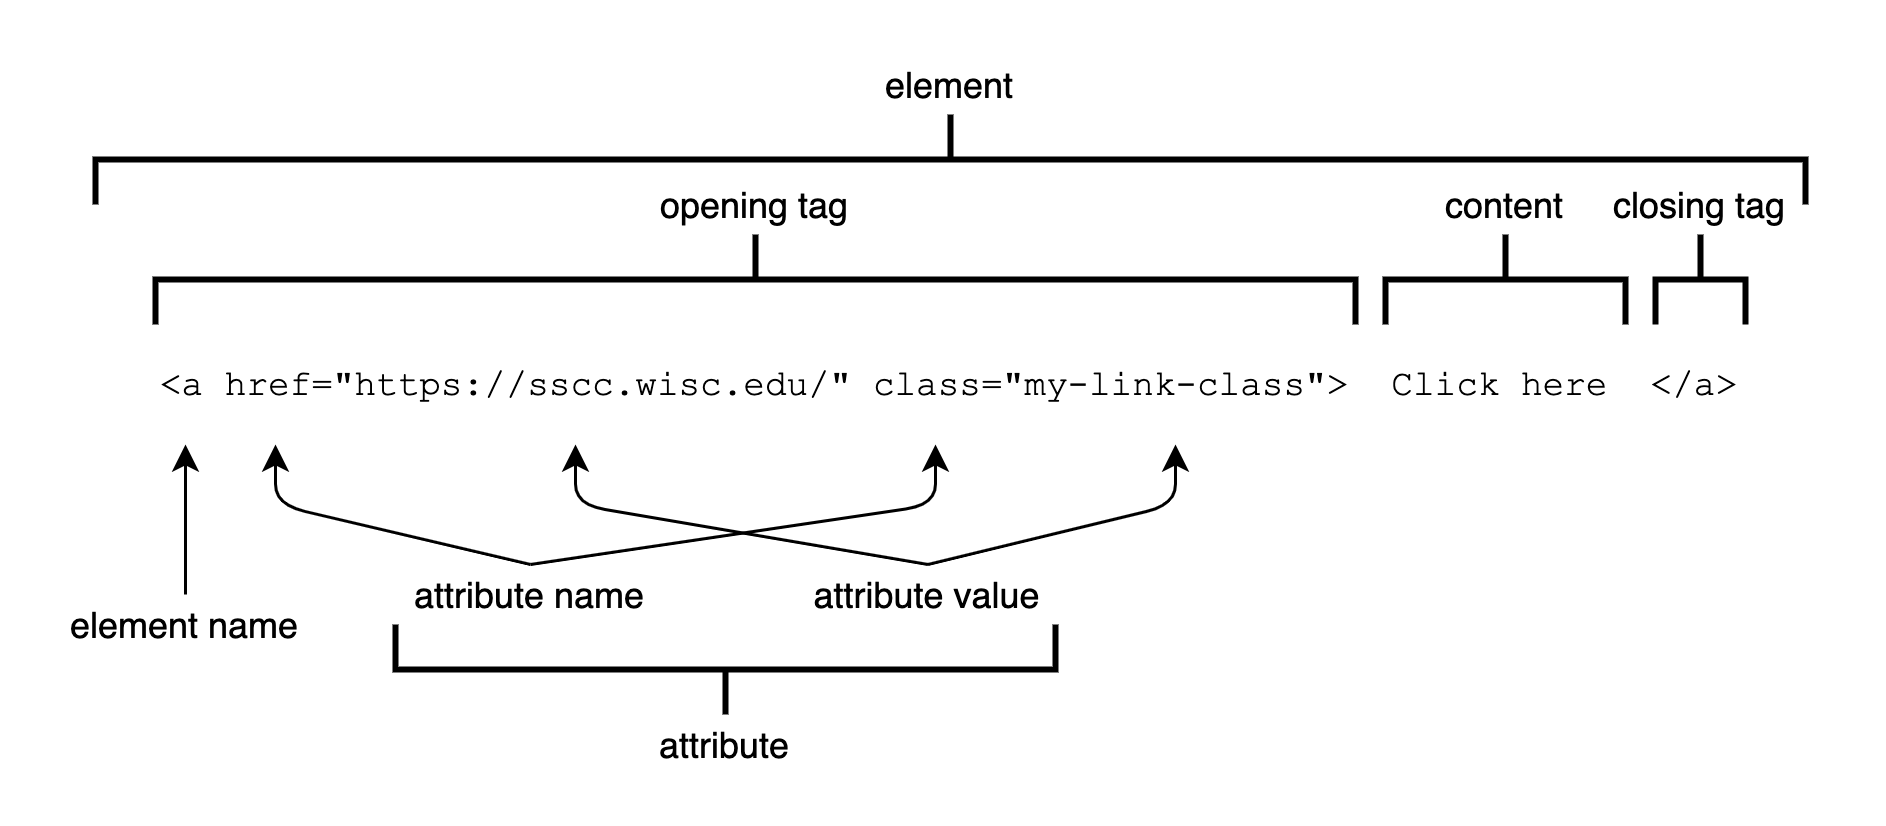 components of an HTML element